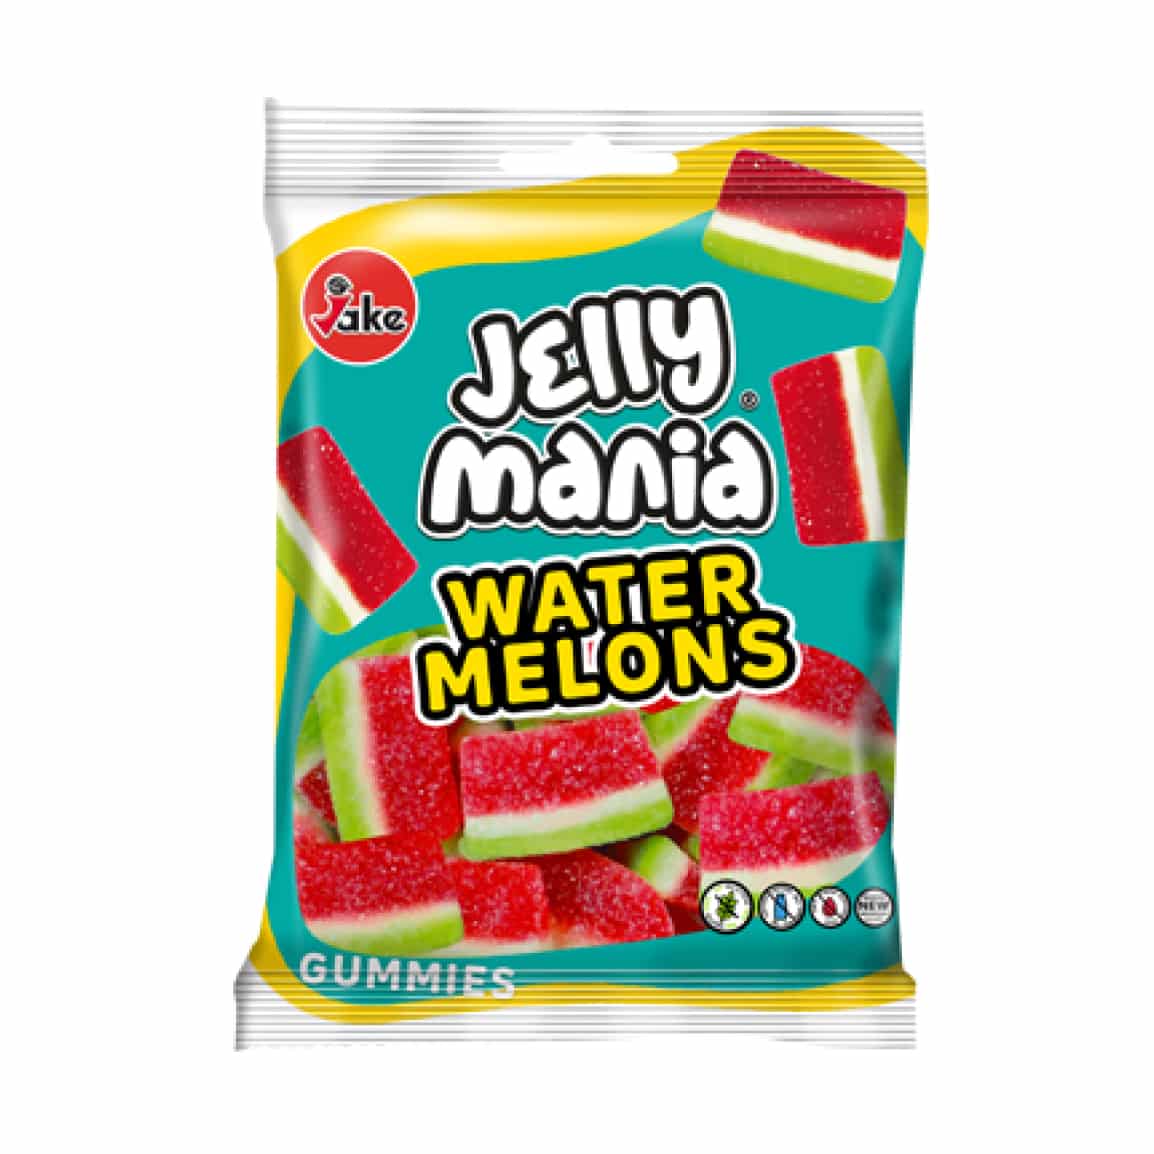 Jake Jelly Mania Sour Watermelons 100g